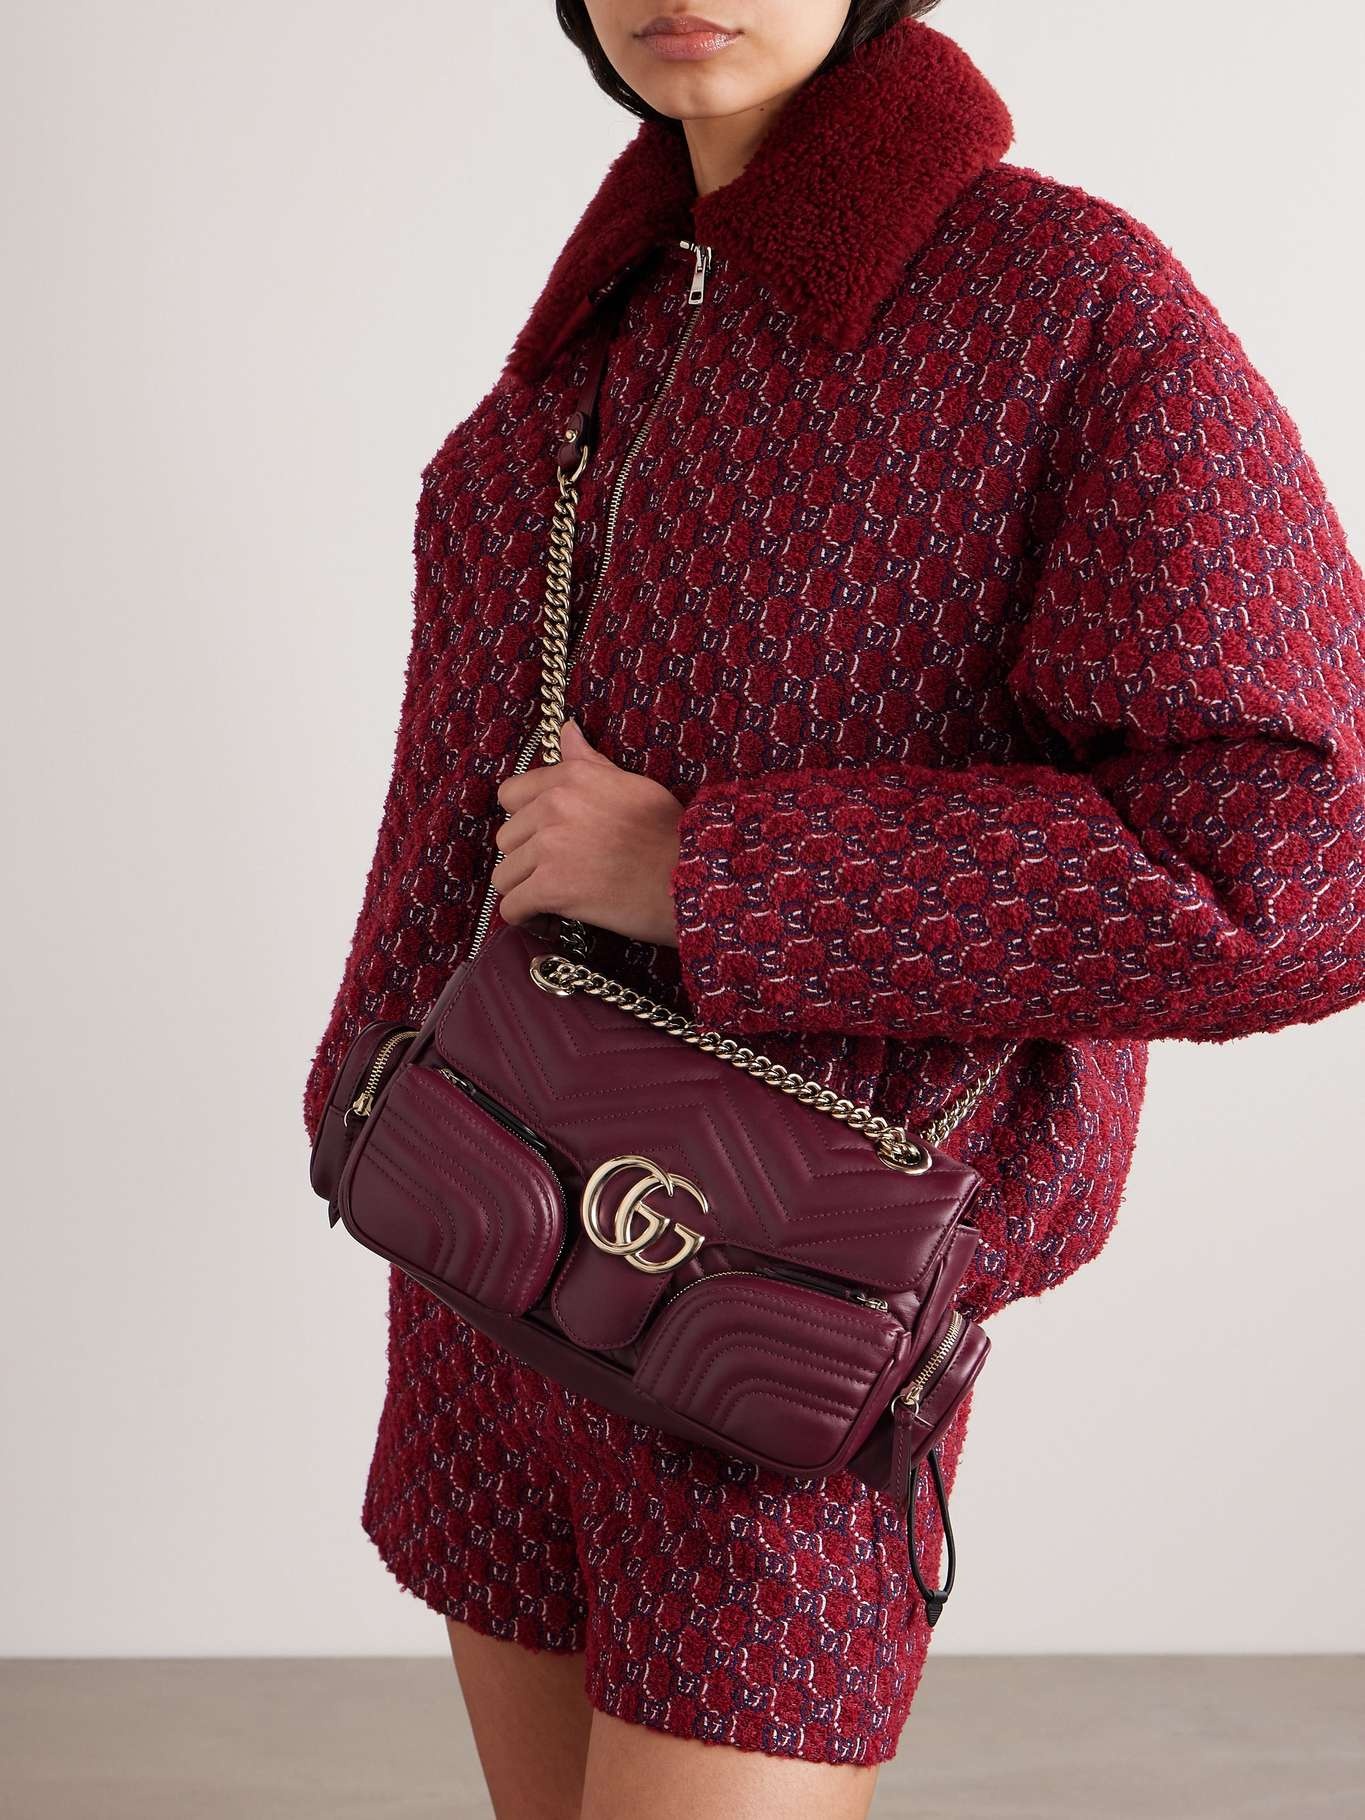 GG Marmont 2.0 quilted leather shoulder bag - 6